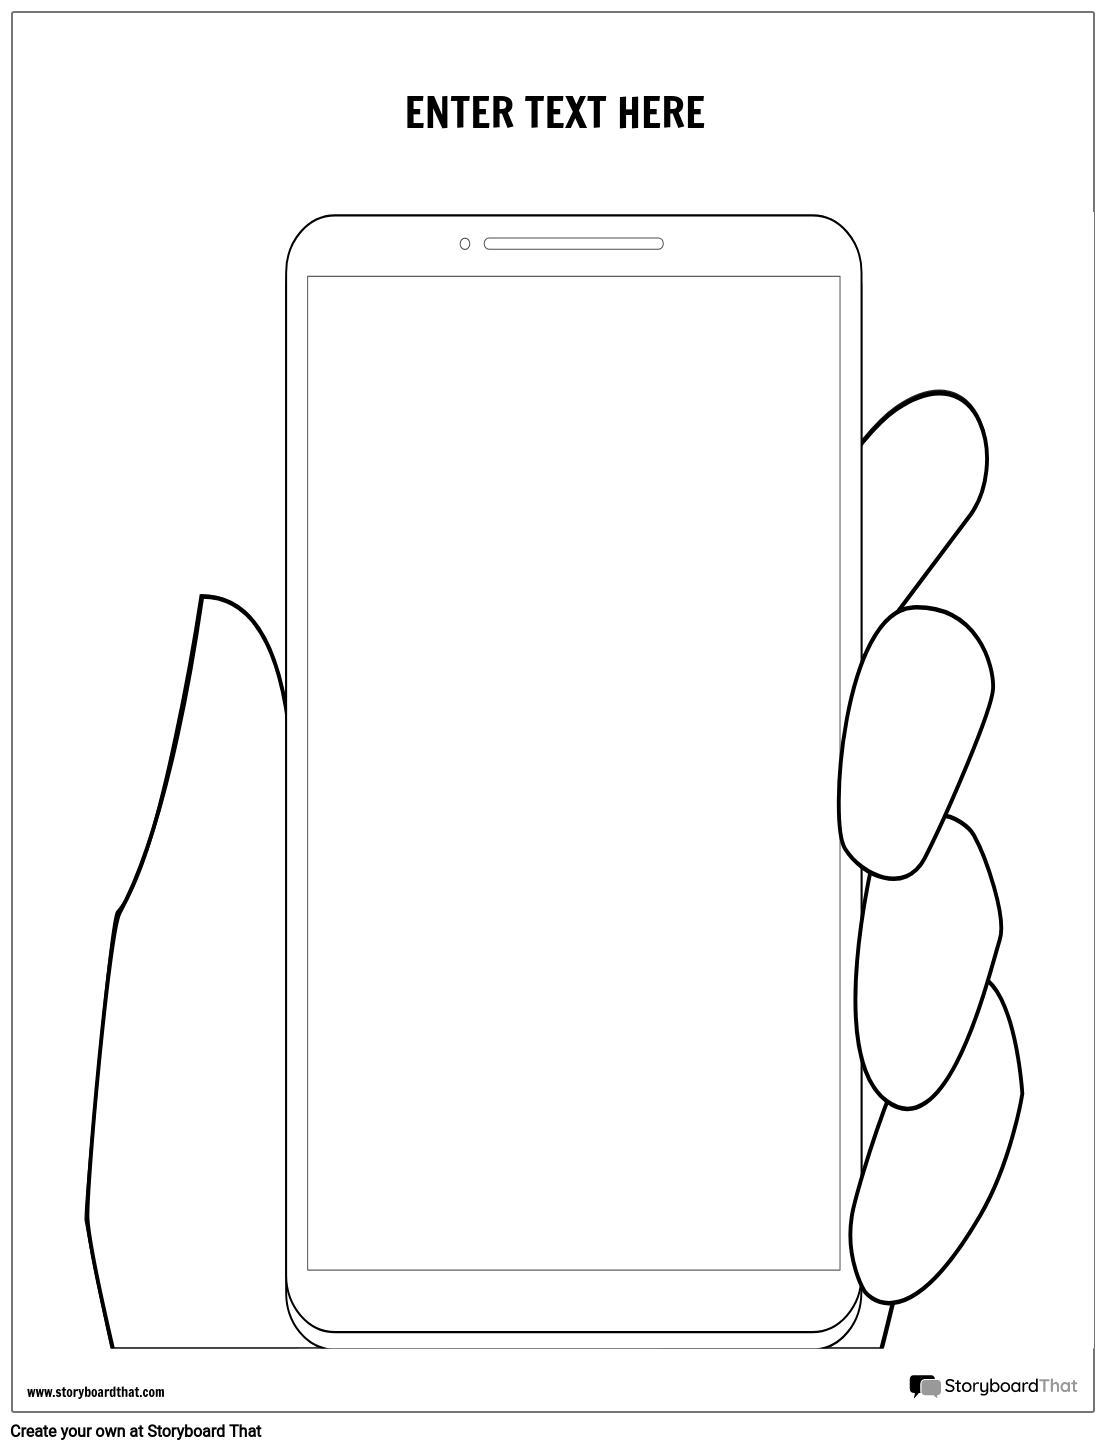 Journal Cover Template Featuring a Cell Phone